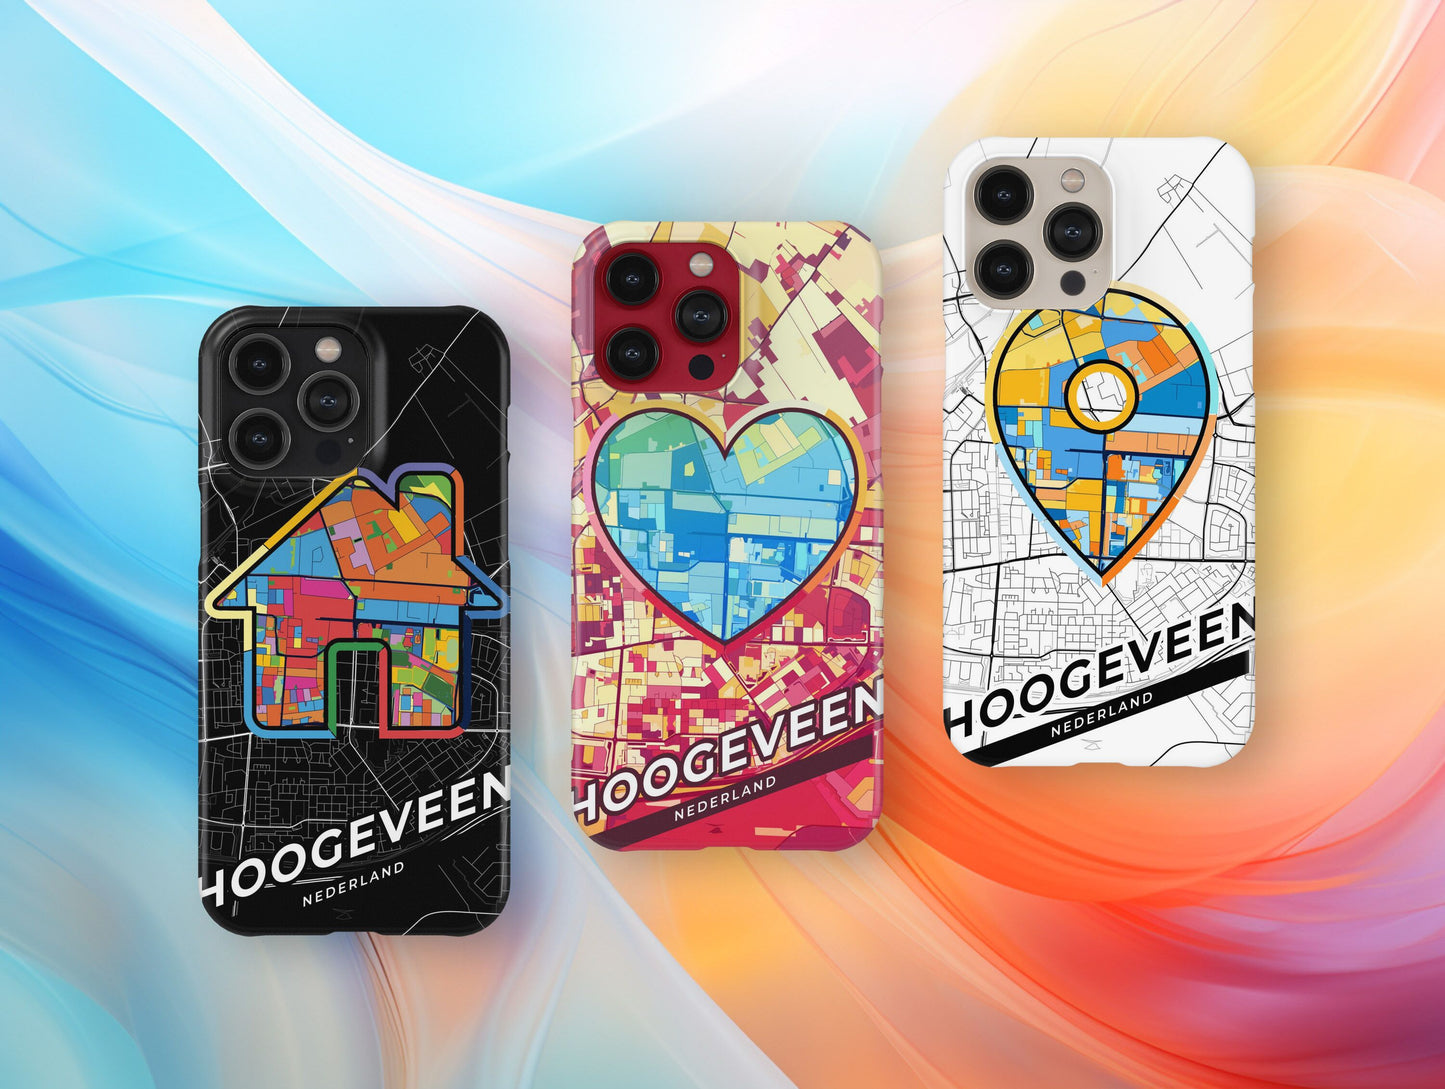 Hoogeveen Netherlands slim phone case with colorful icon. Birthday, wedding or housewarming gift. Couple match cases.